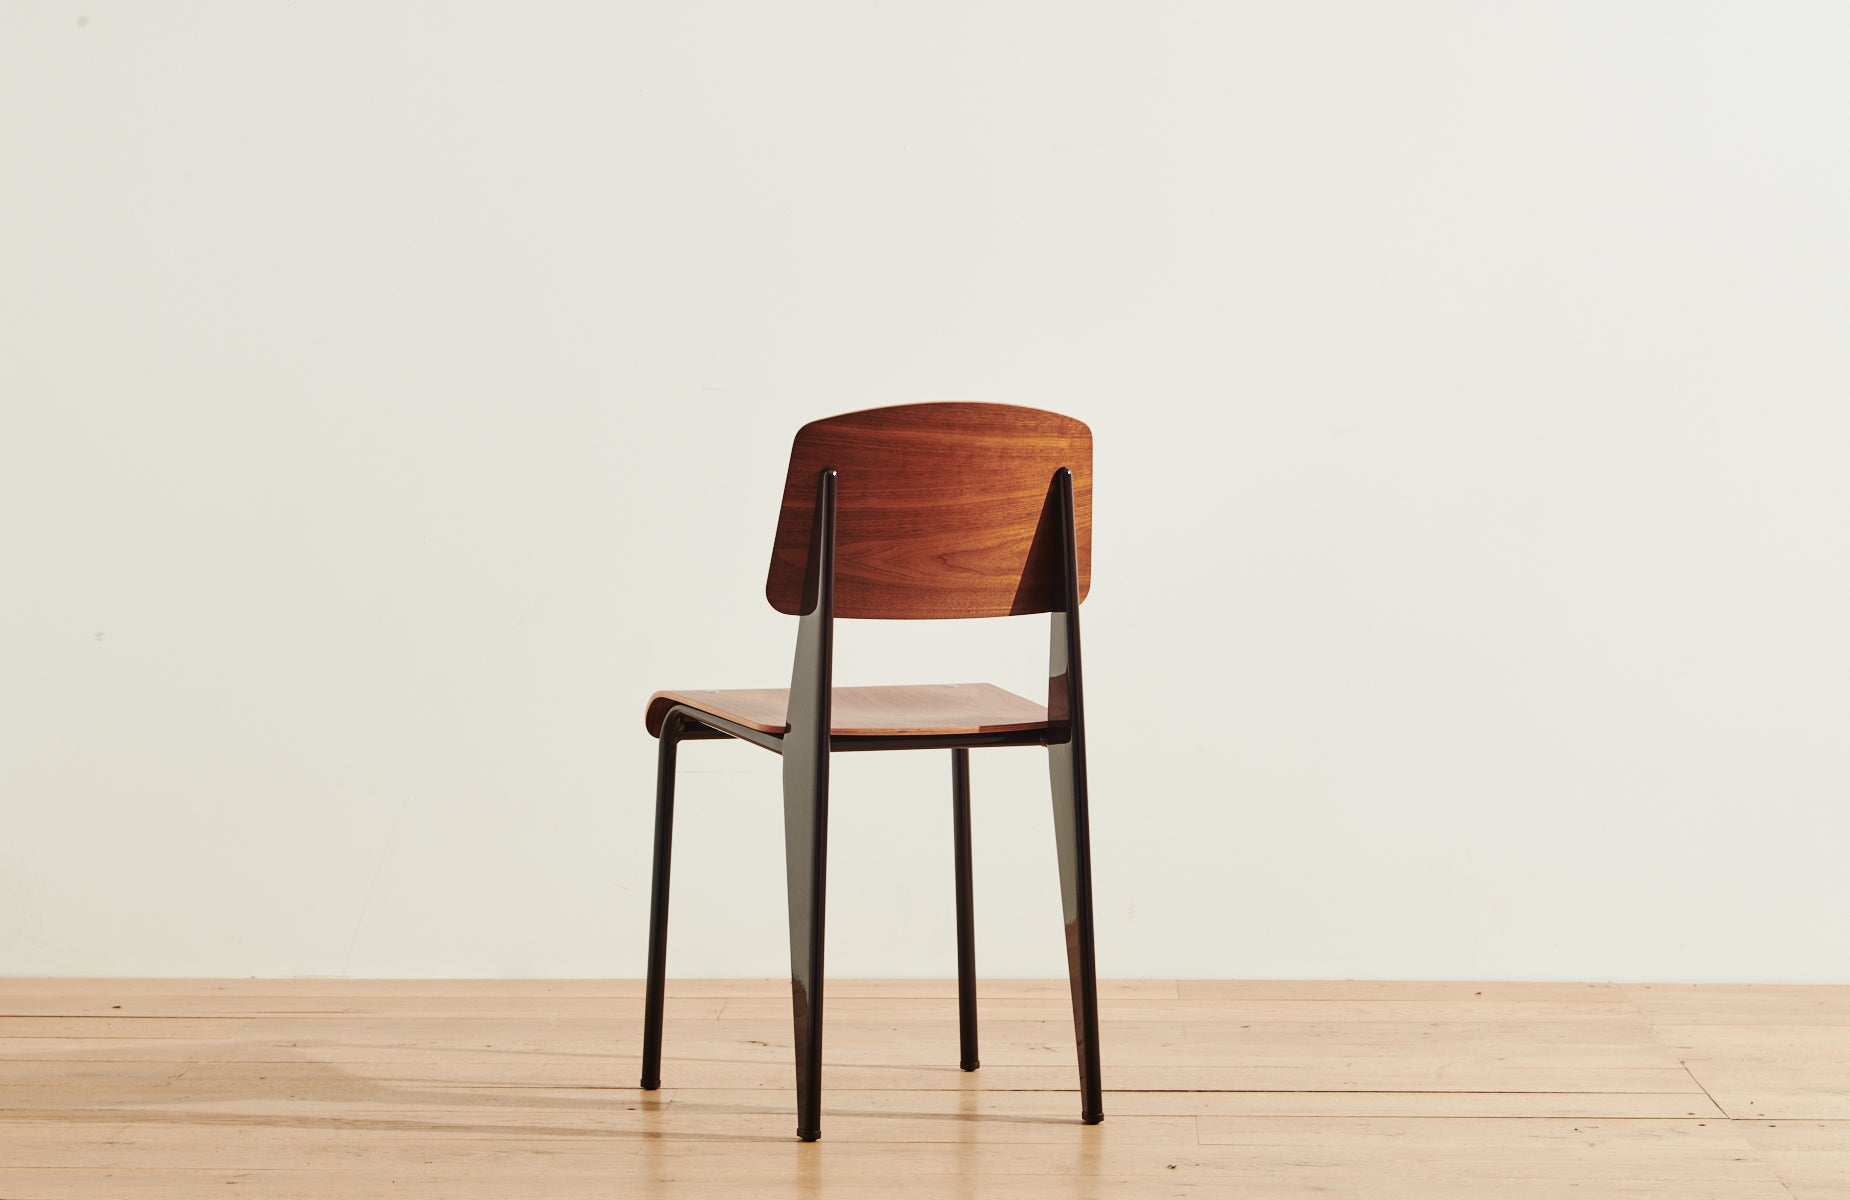 Authentic Standard Chair by Jean Prouvé for Vitra – ZZ Driggs